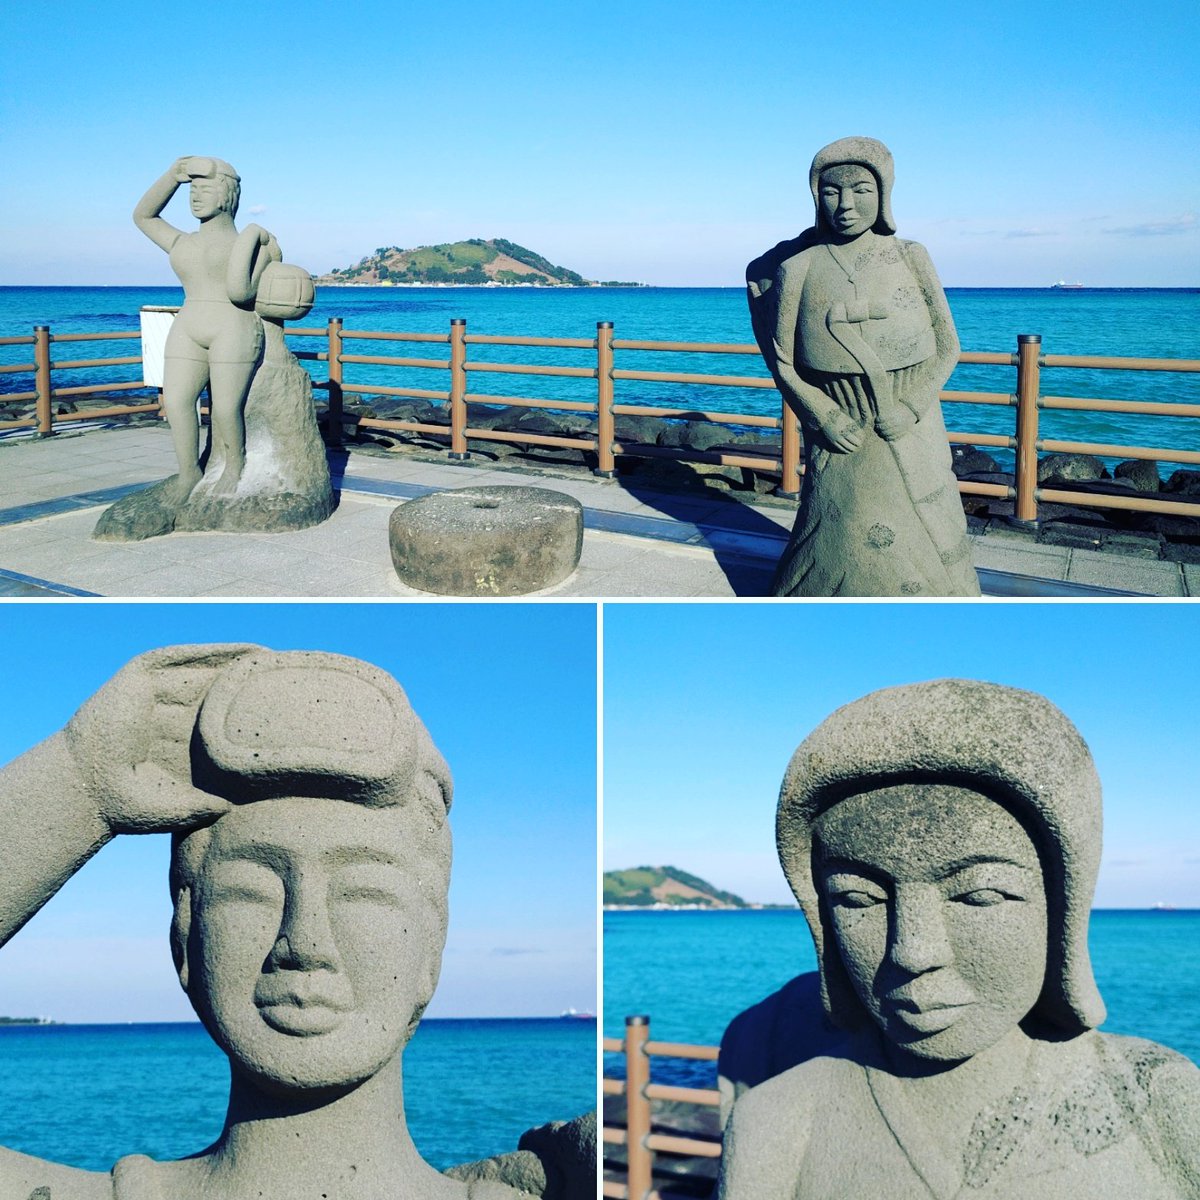 Jeju Tourism English On Twitter Fantastic Morning At Hyeopjae Beach Jeju Korea These Statues Represent Haenyeo Diving Women And Women Collecting Drinking Water From Natural Springs Visitjeju Https T Co Ggjtqtvanz ì œì£¼ë„ ë¹„ì§